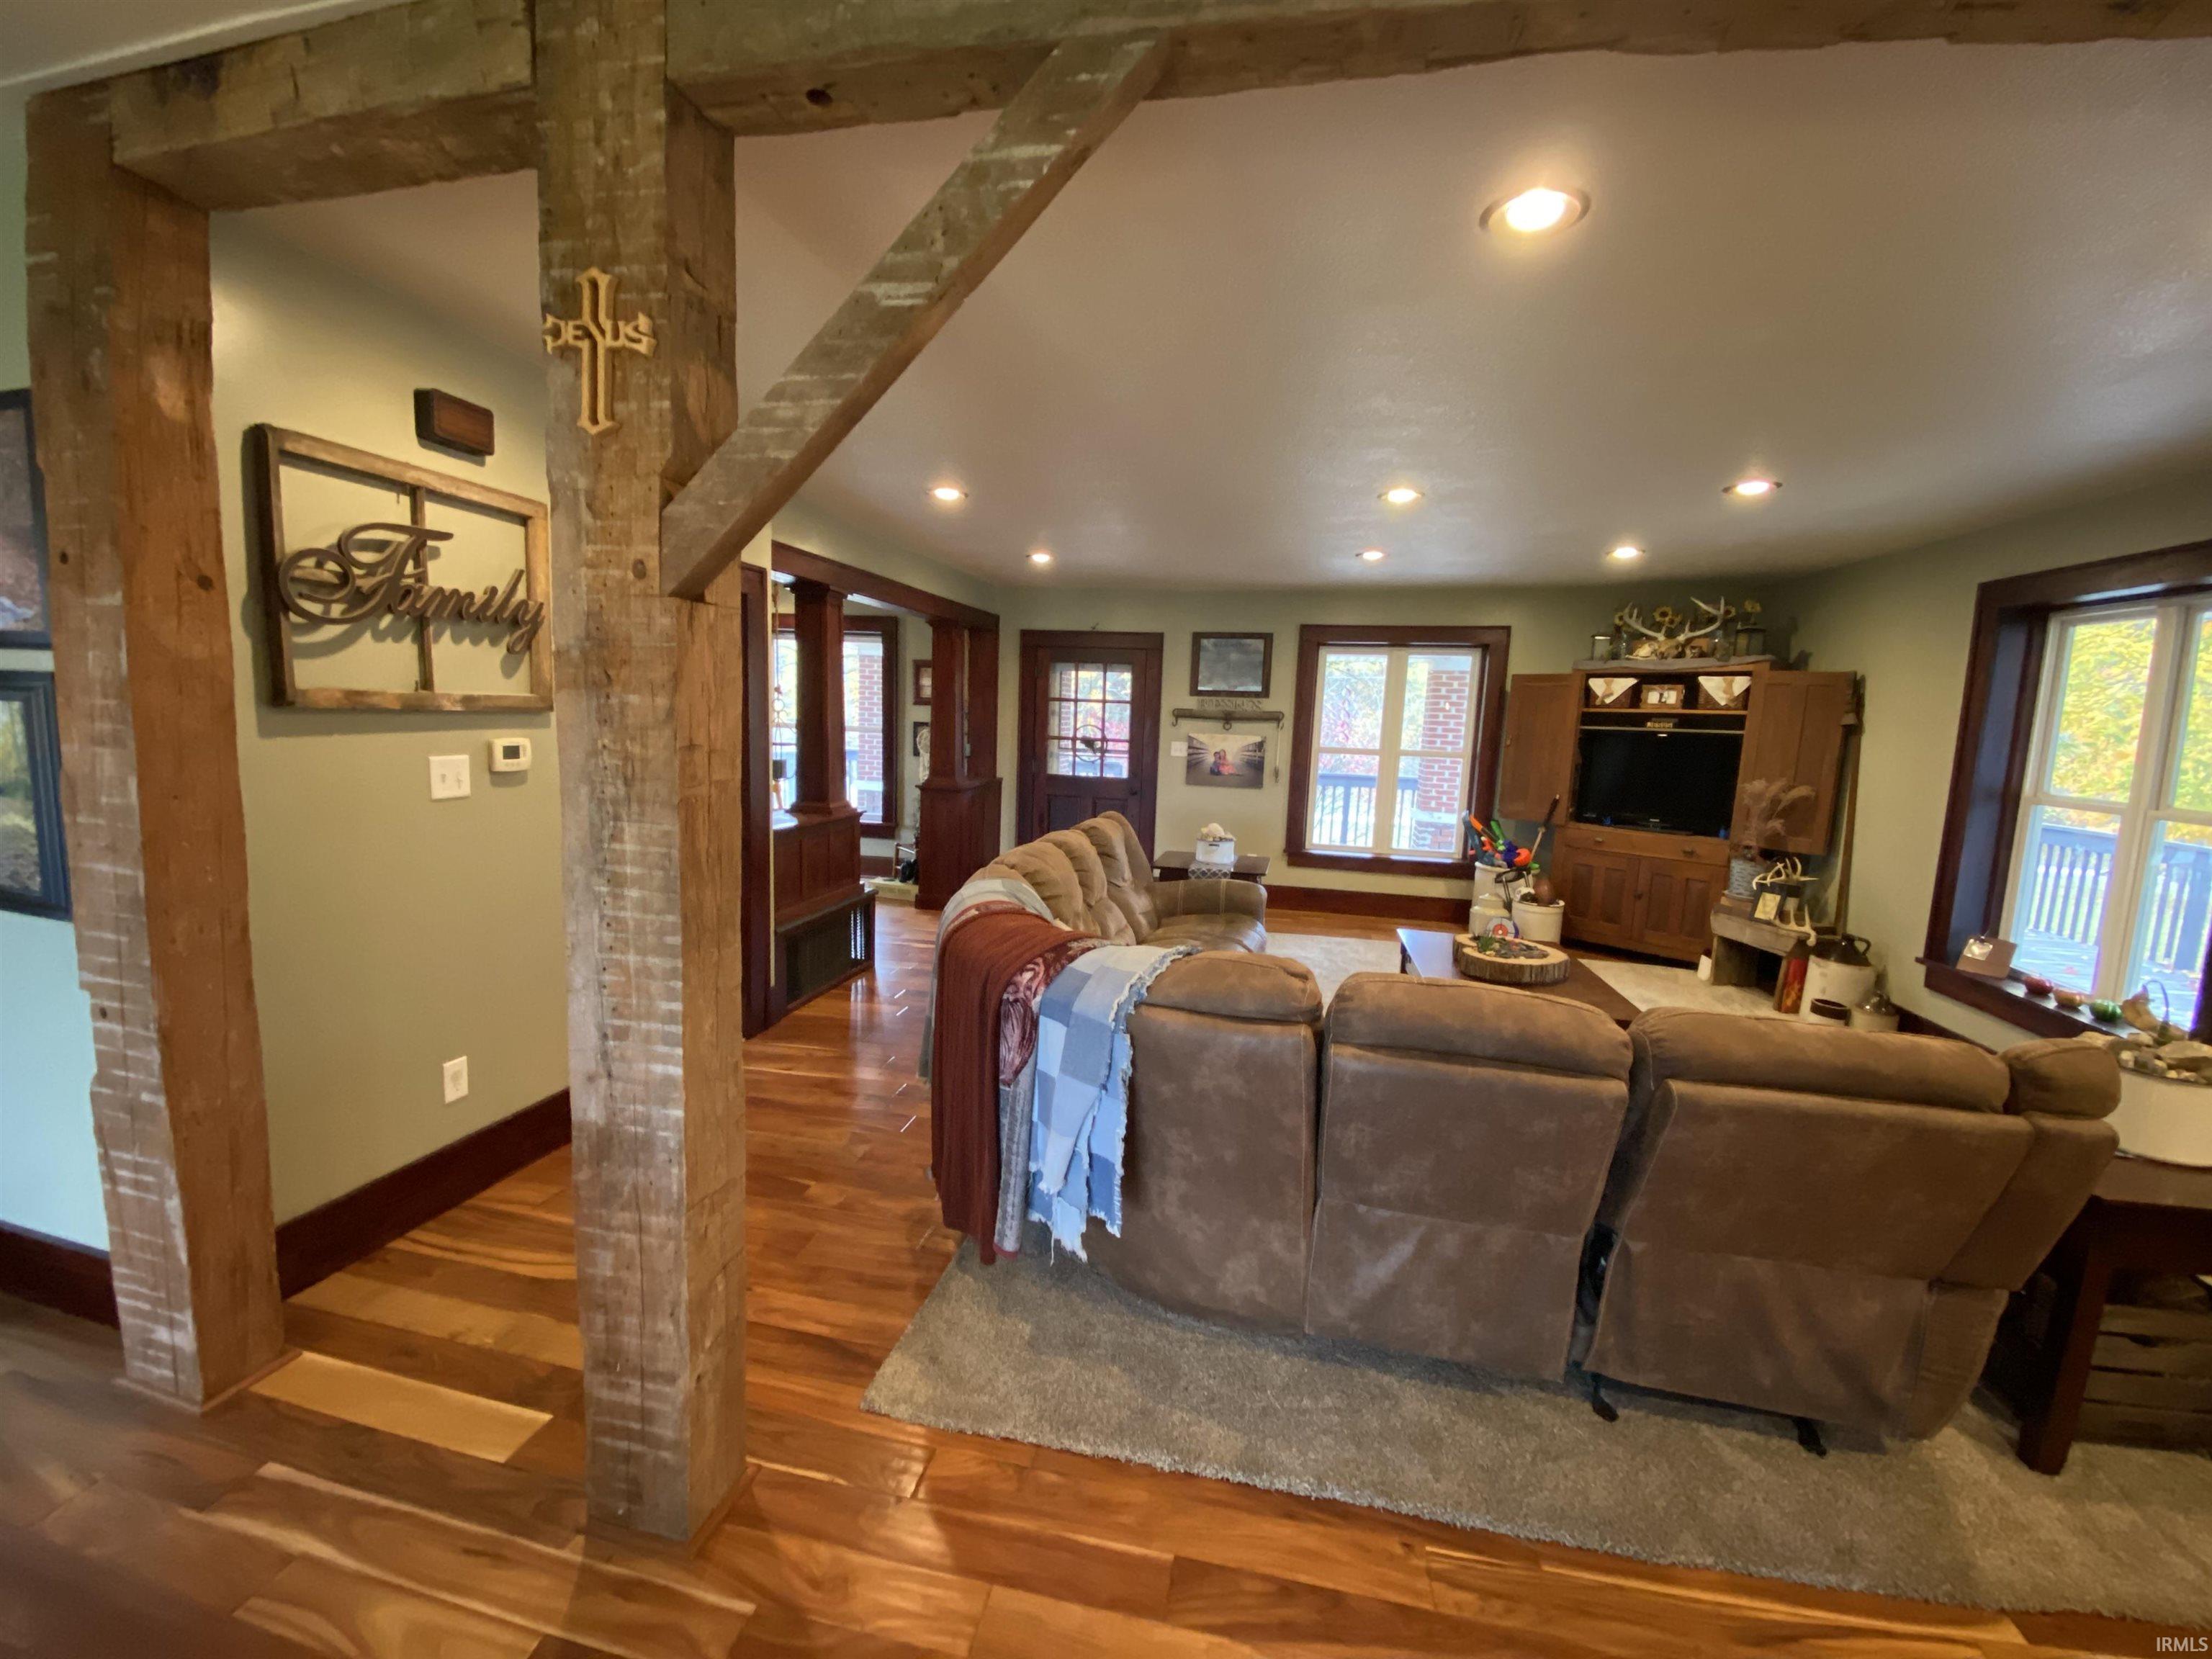 Gorgeous Beams with Hardwood Floors Throughout!